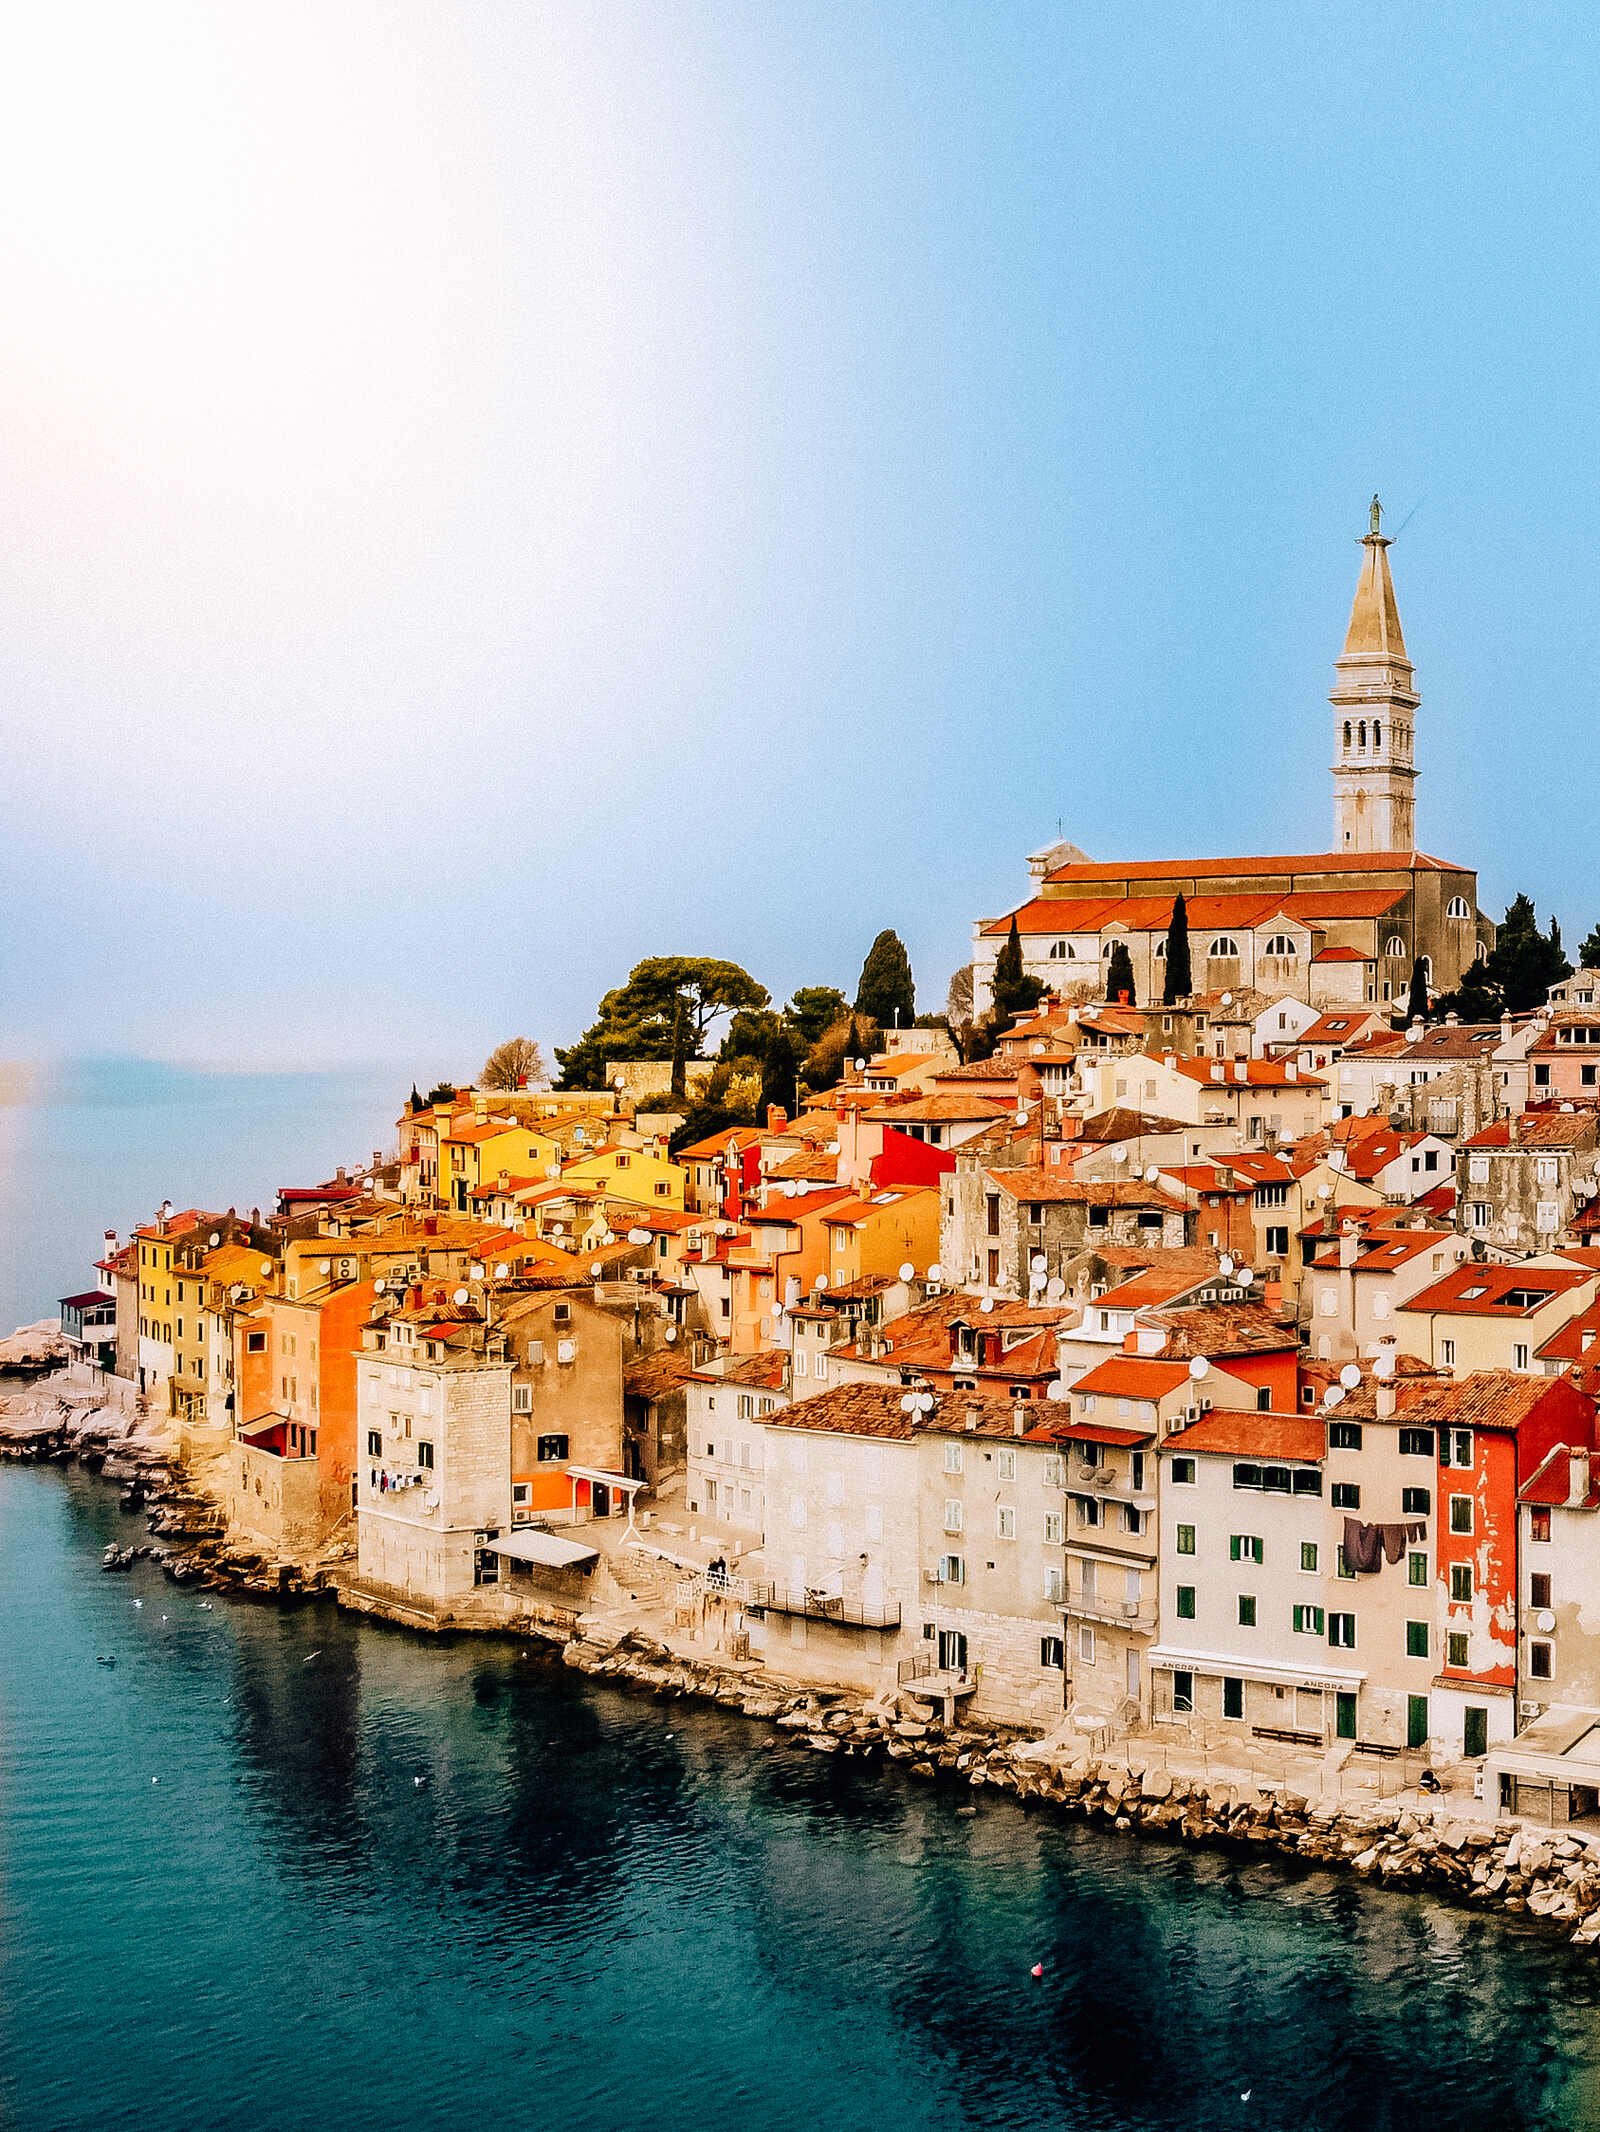 the colourful historic old town of Rovinj